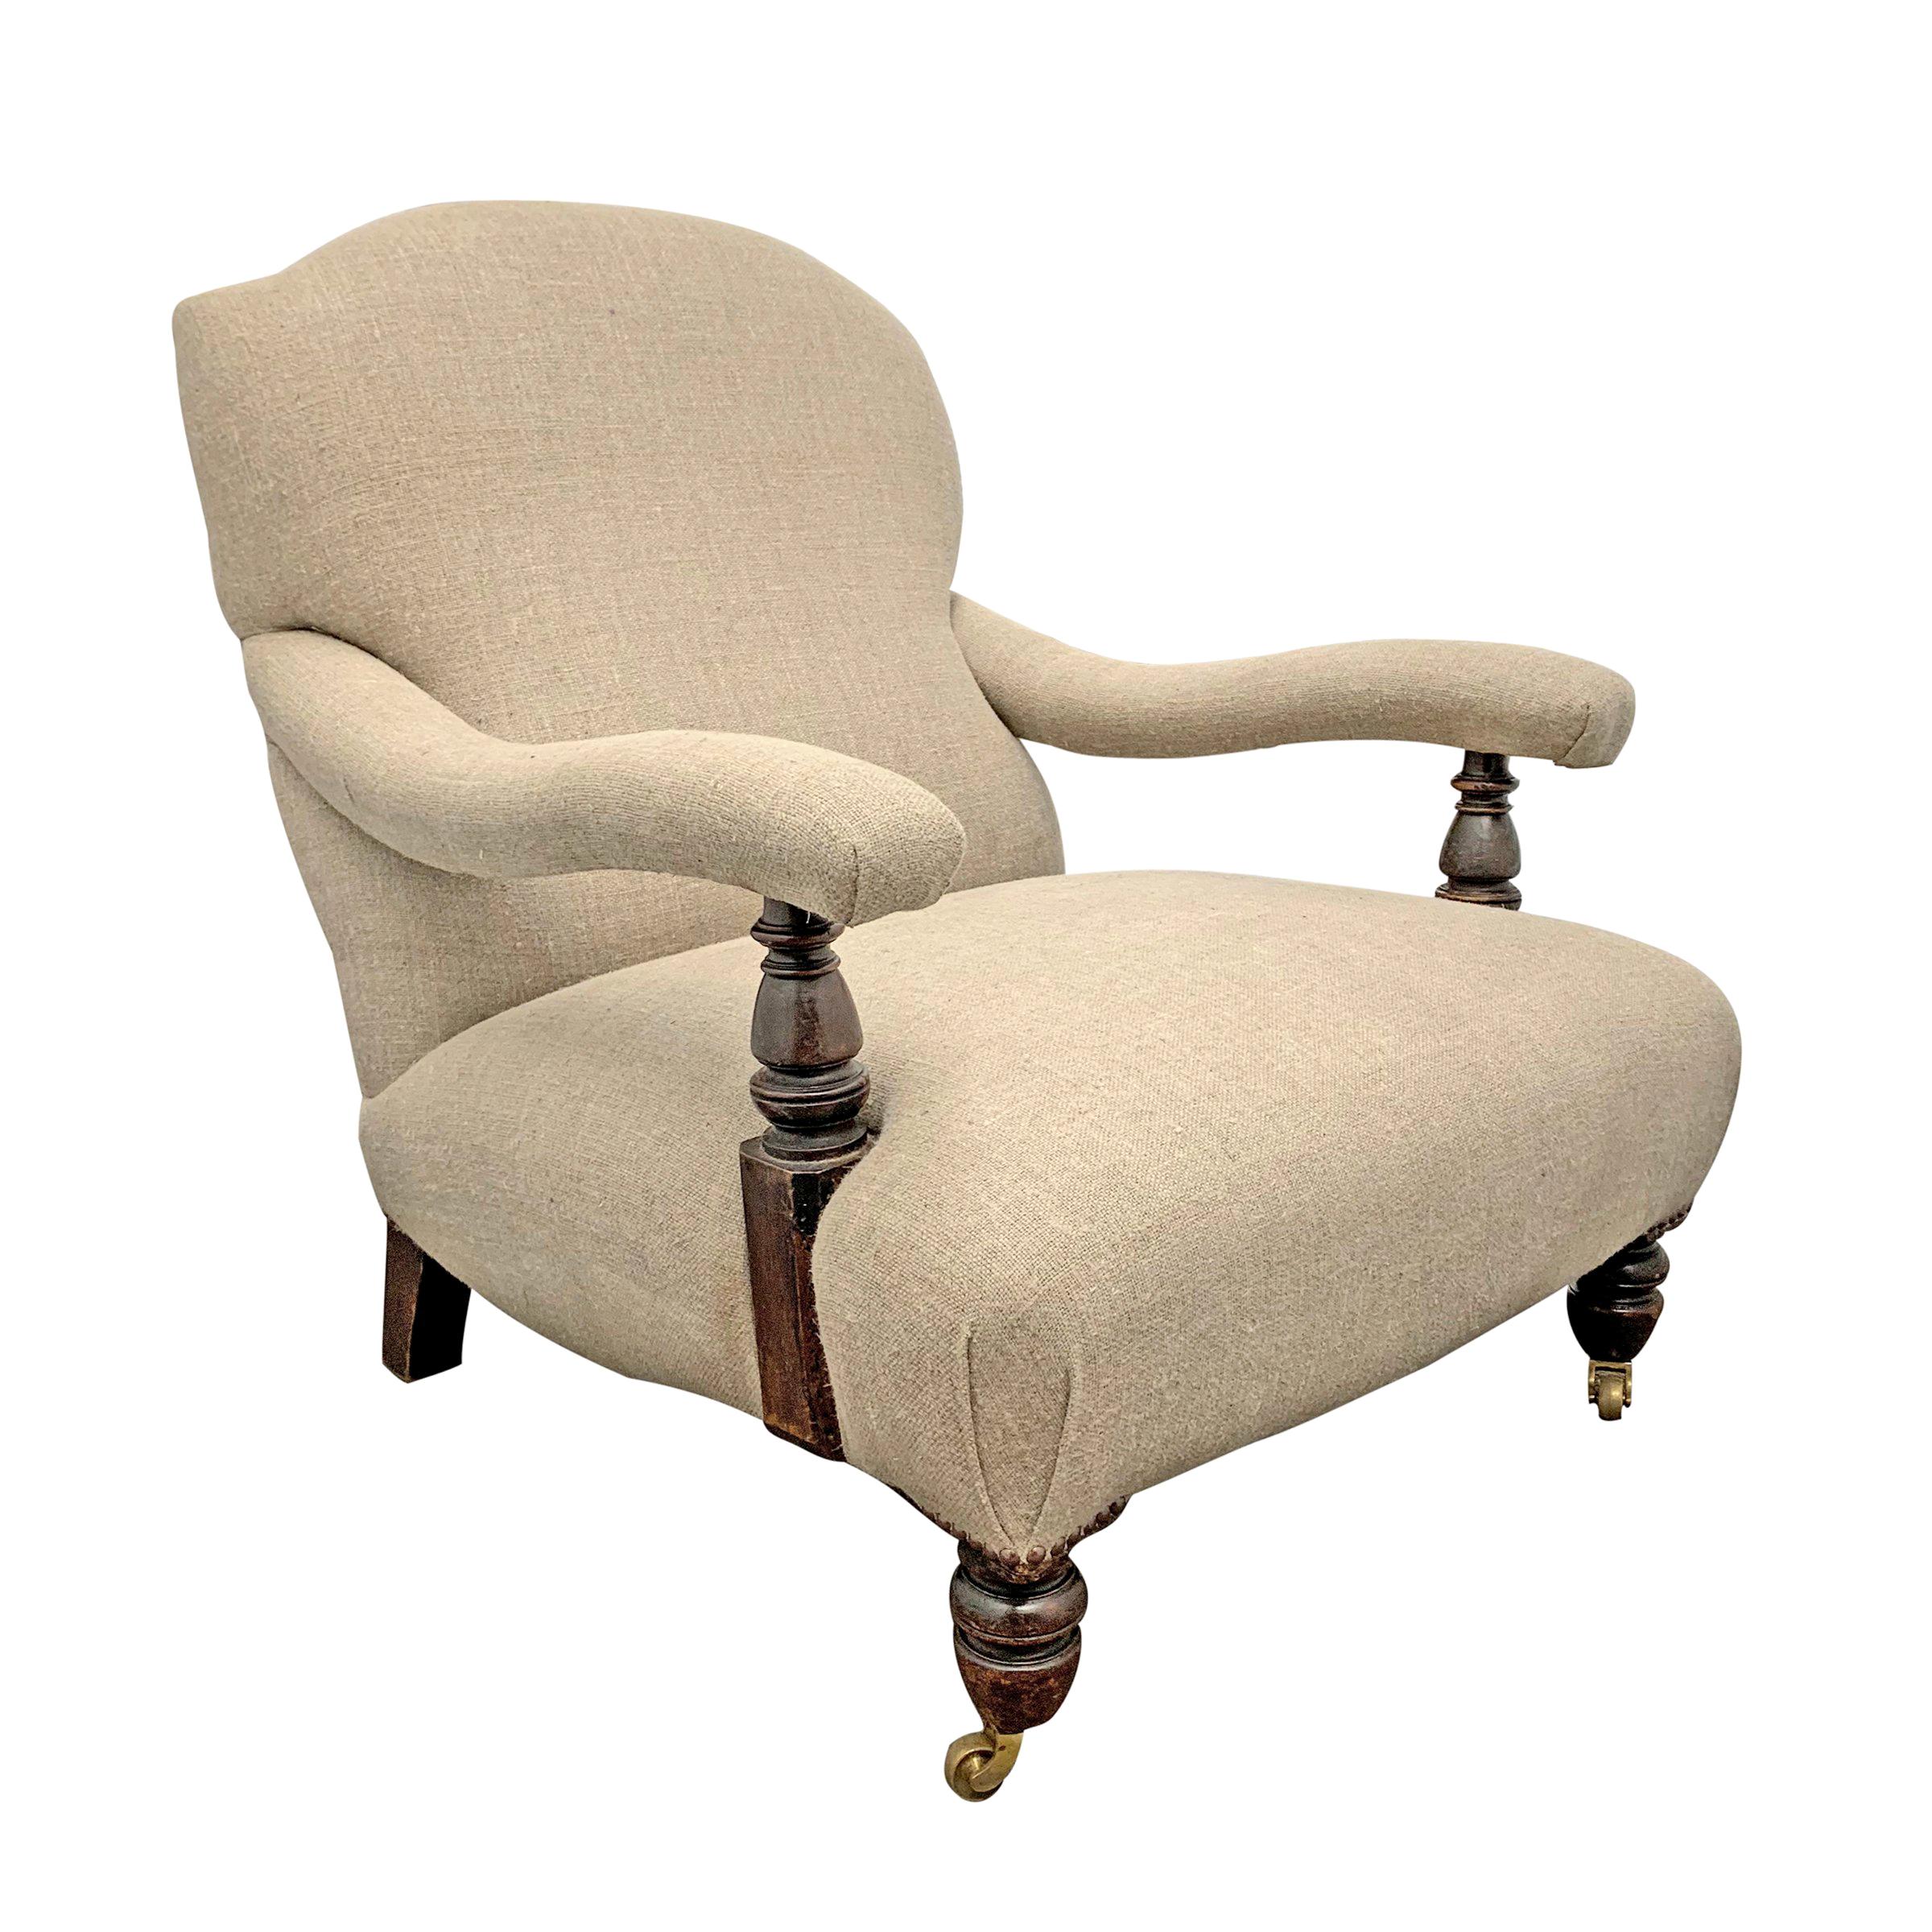 19th Century English Country House Armchair